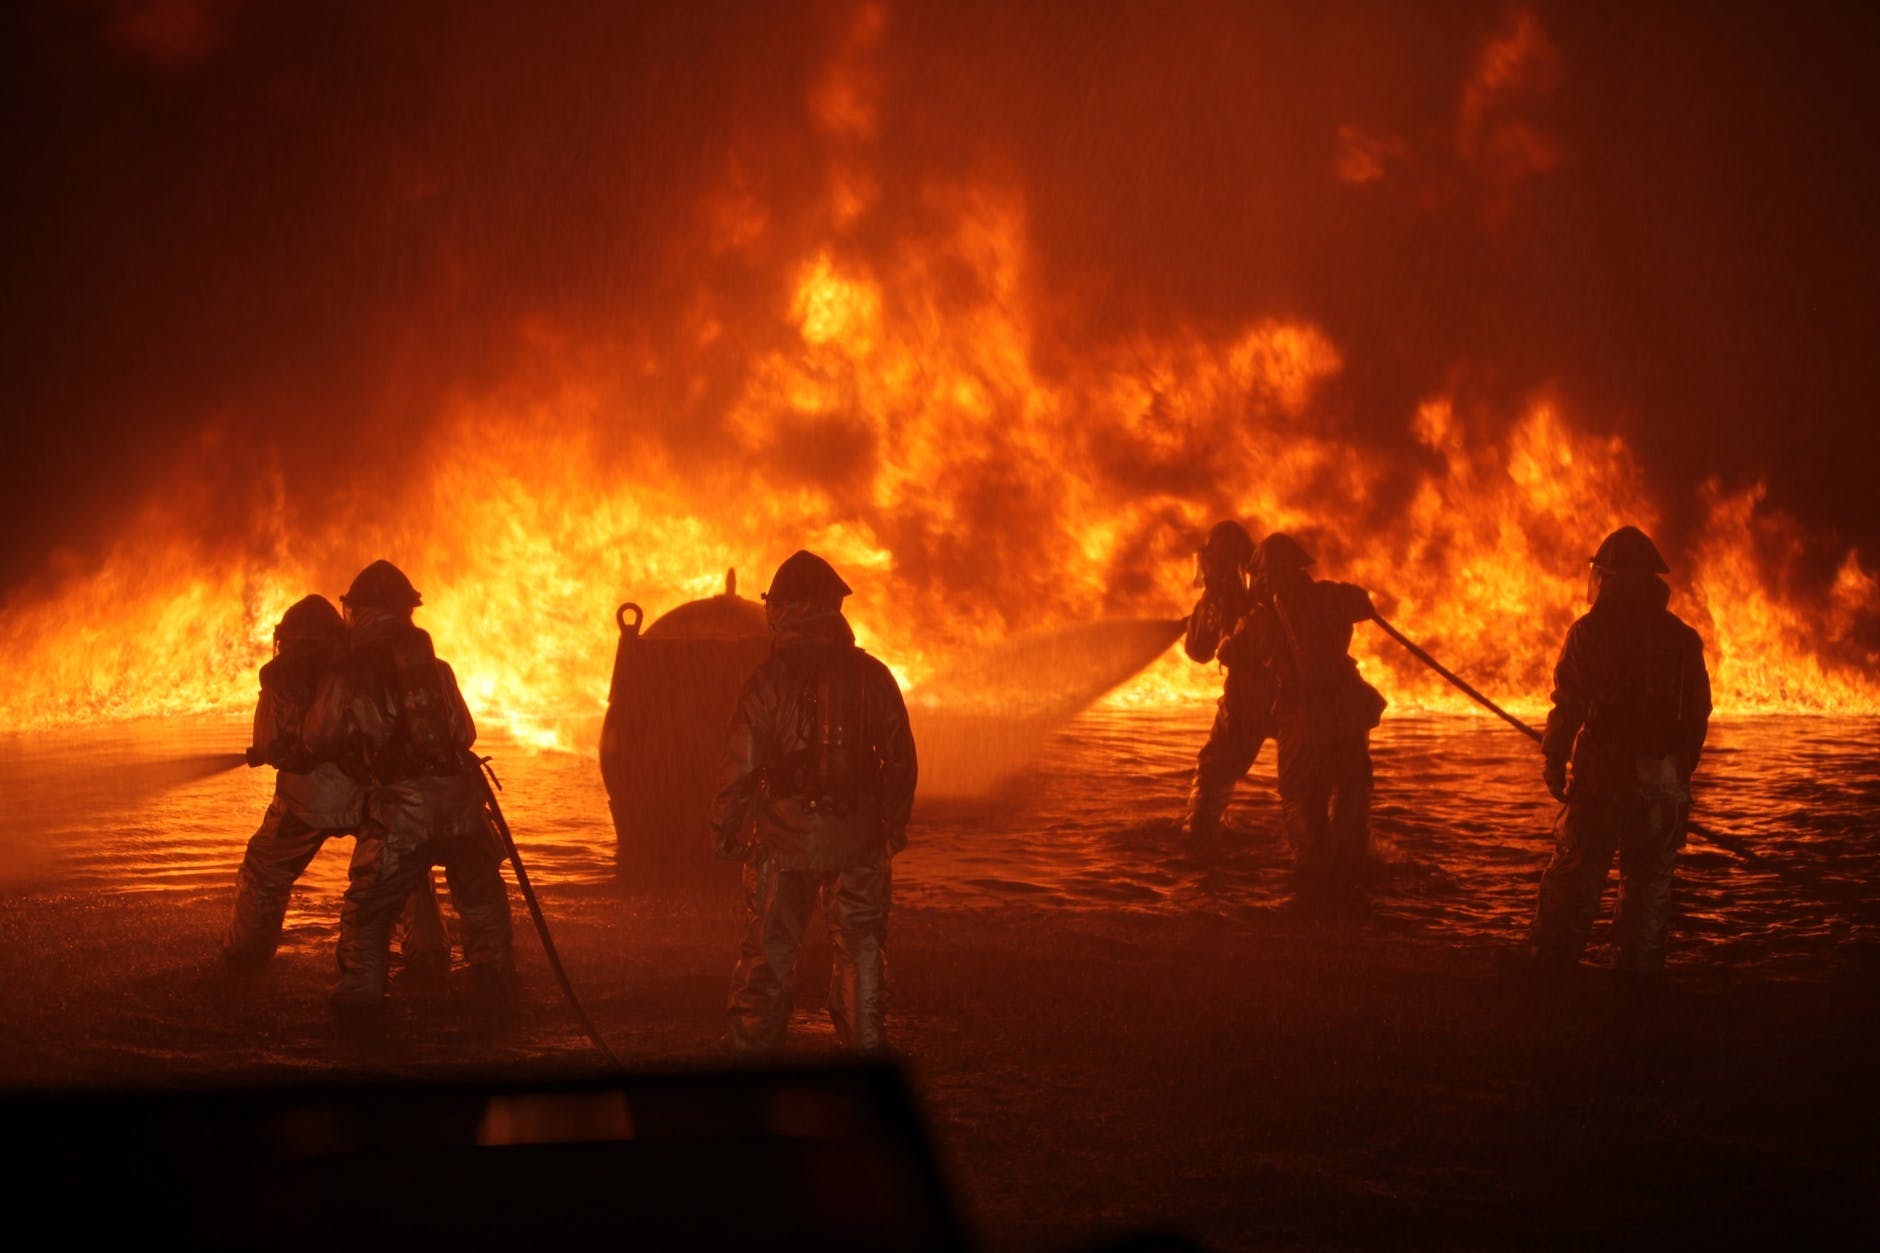 Firefighters fighting fire (Photo by Pixabay)